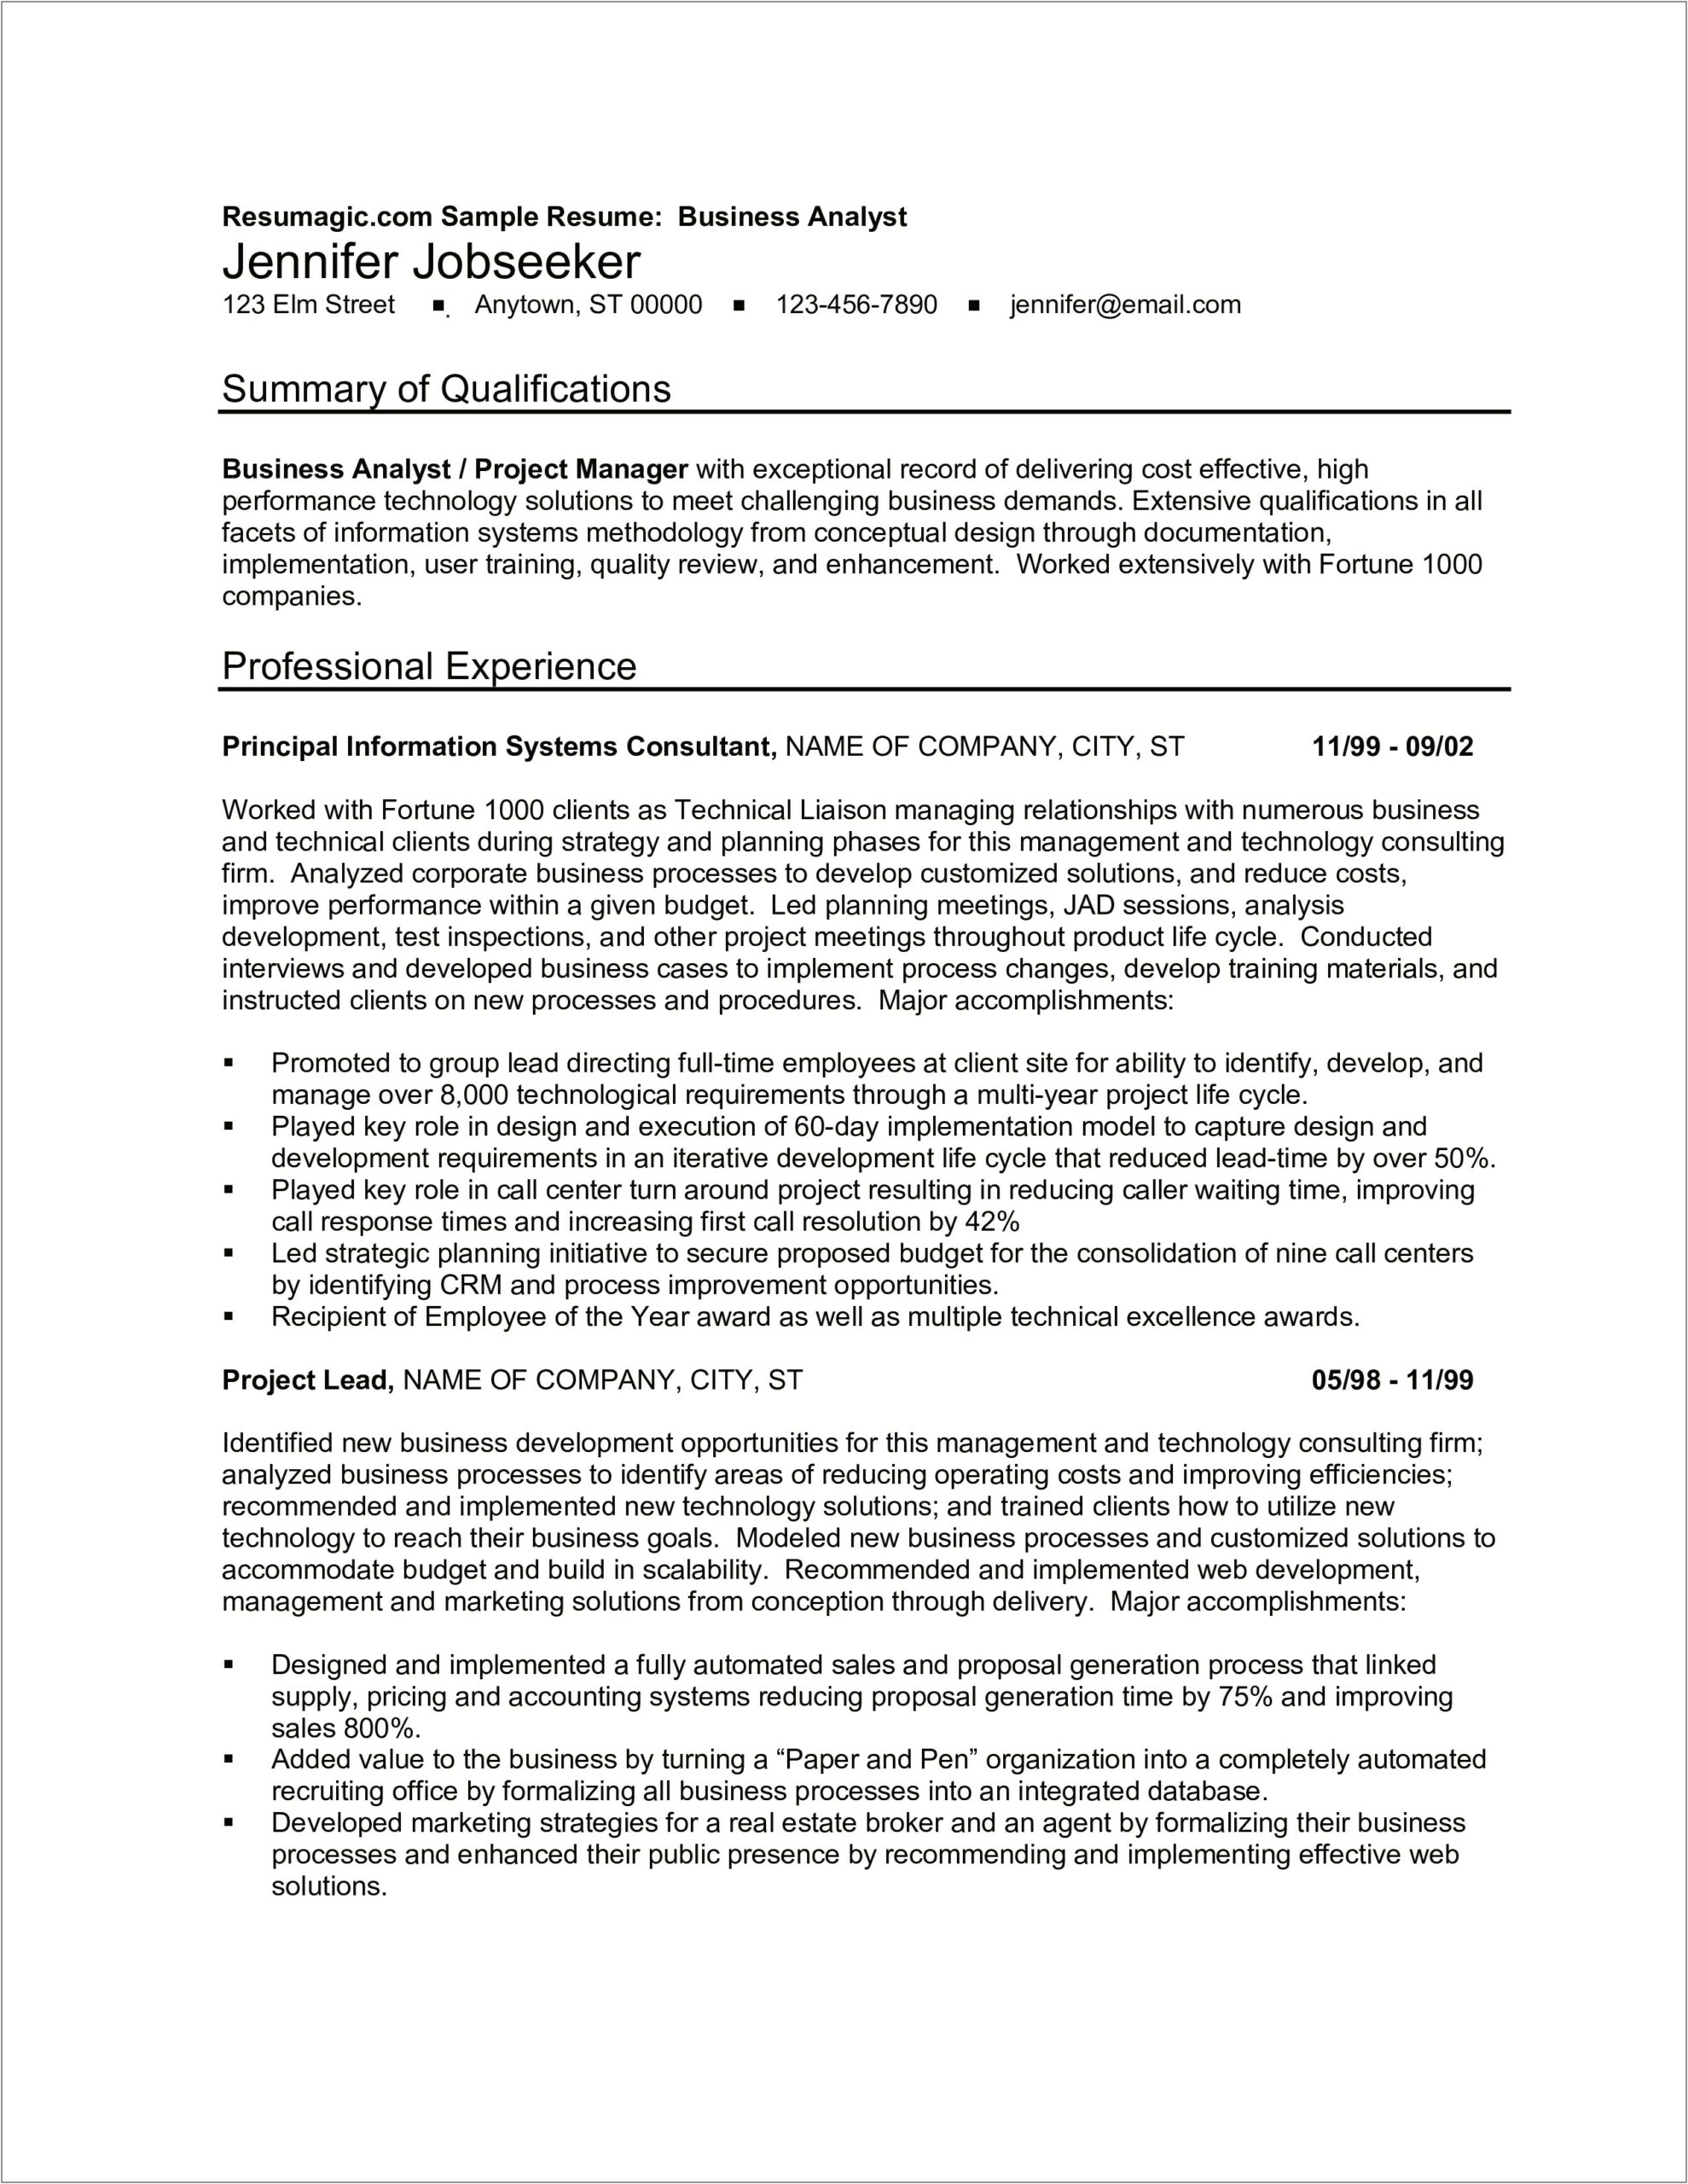 Resume Objective Examples Business Analyst